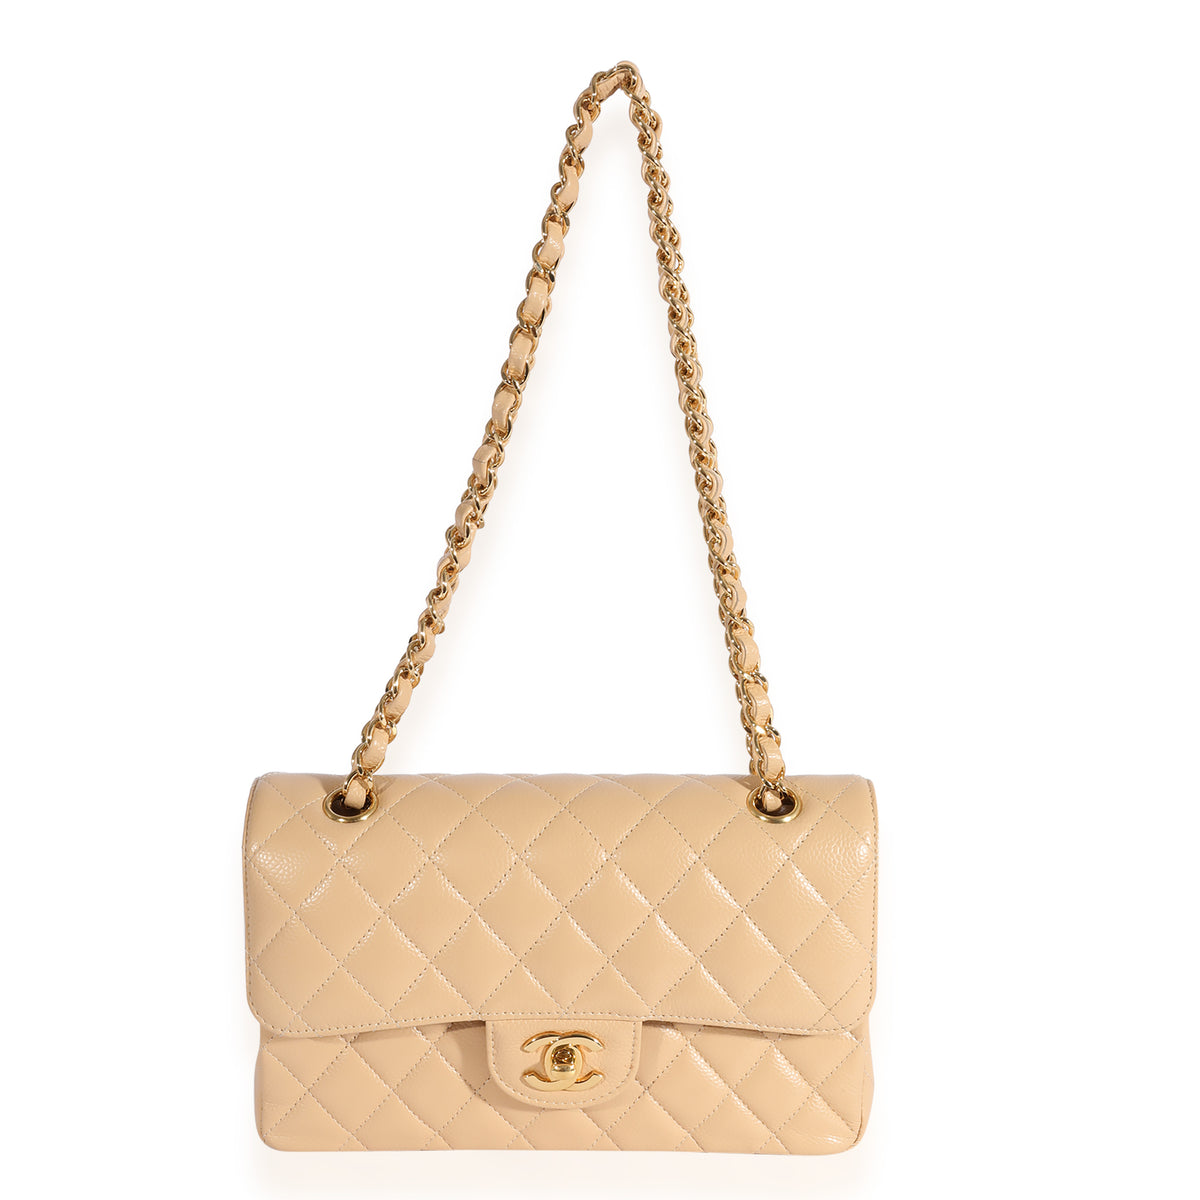 Best Alternatives To The Chanel Flap Bag